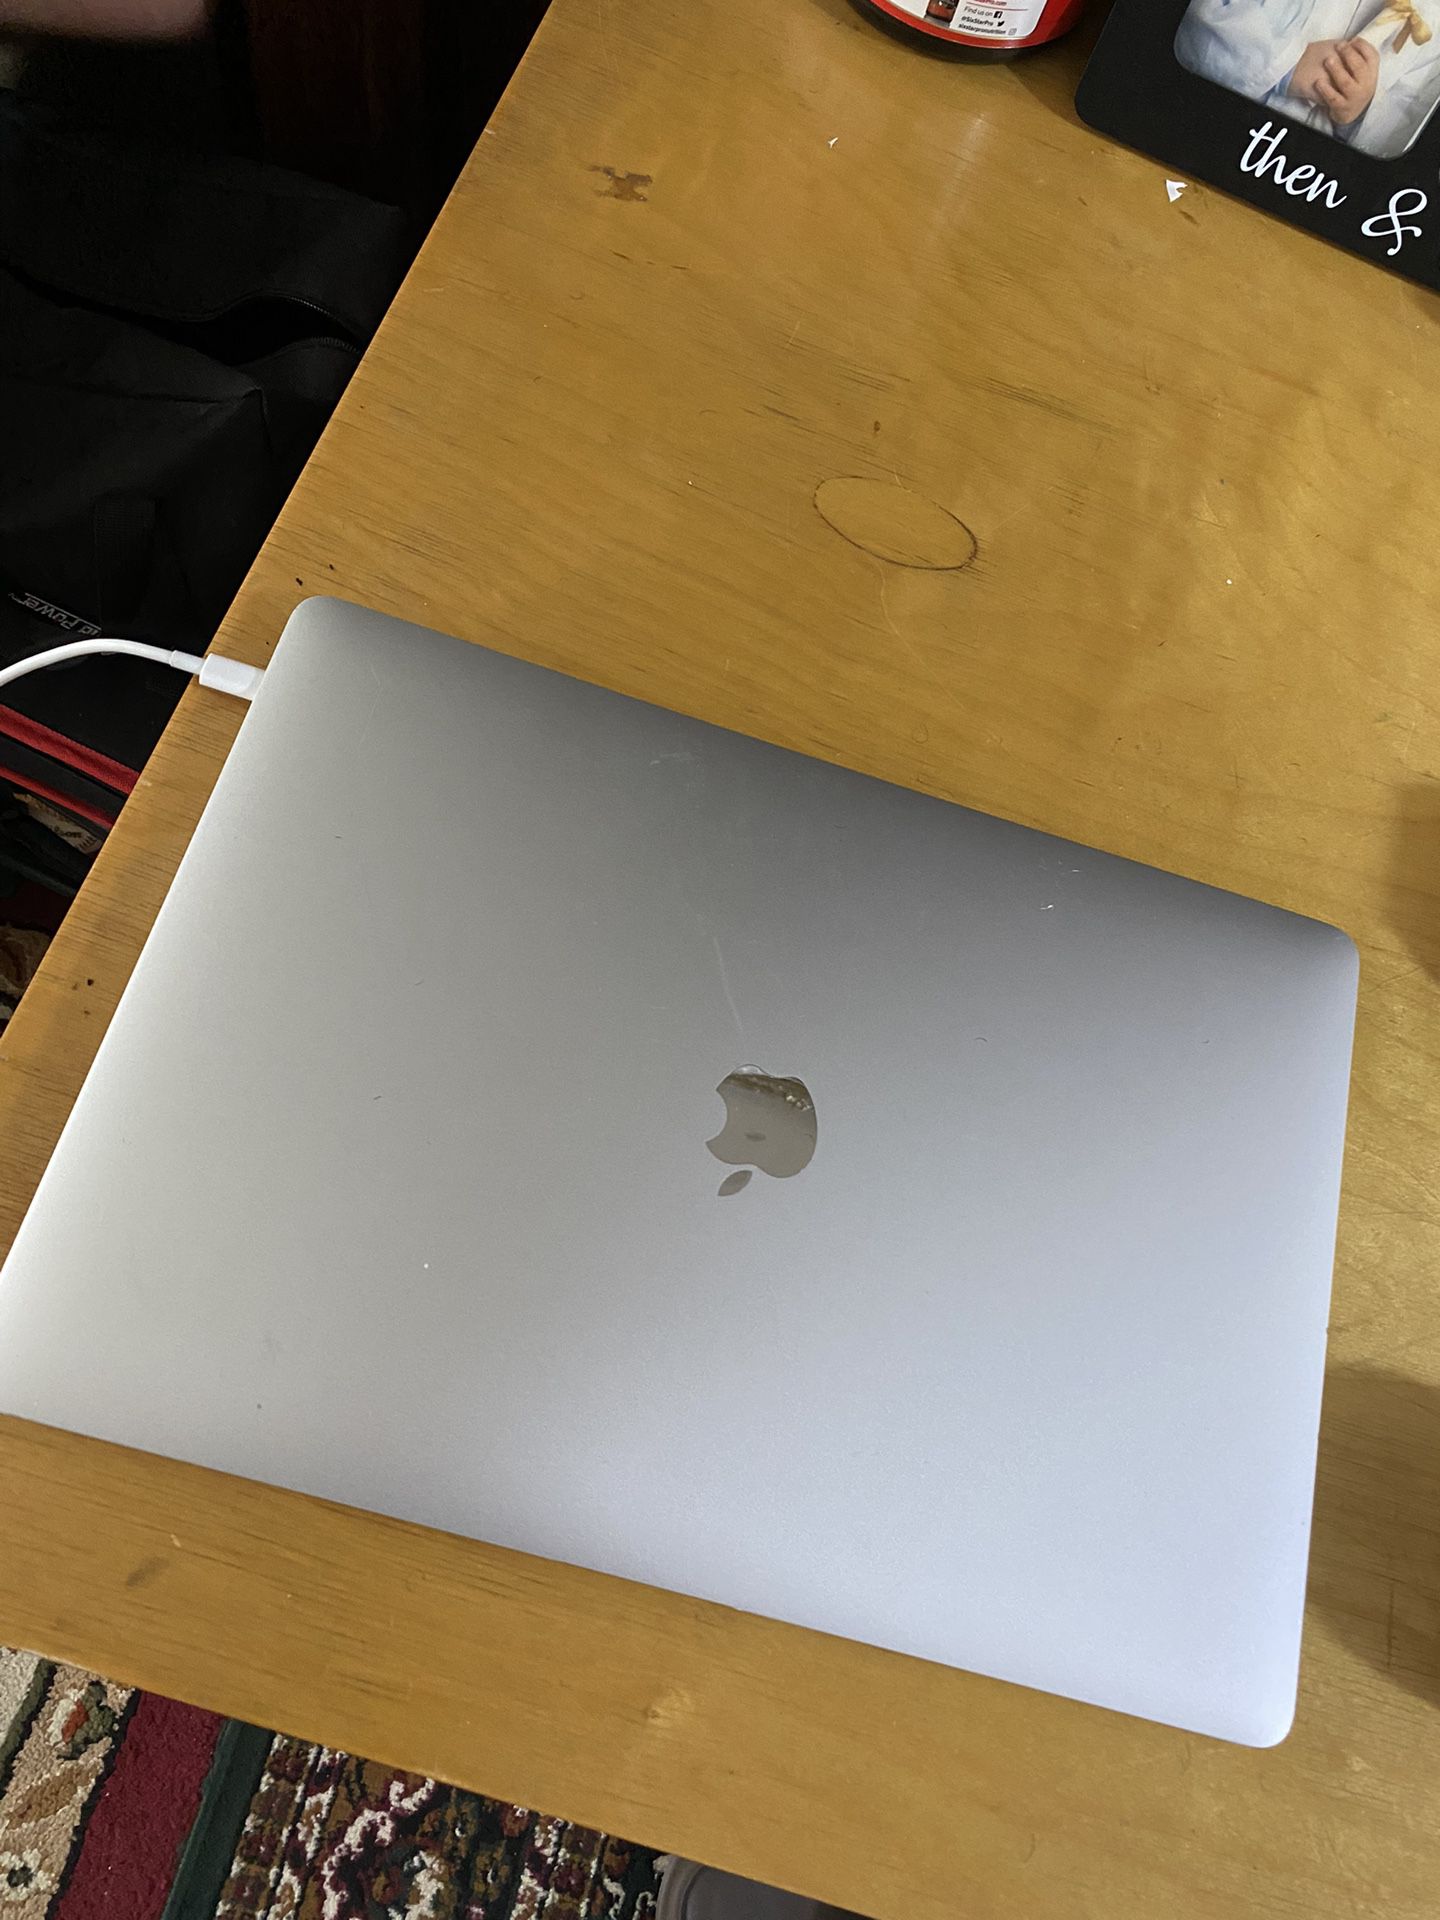 MacBook Pro 💻 15 - Inch Display (Price Negotionable) + (Comes With Purple Case)